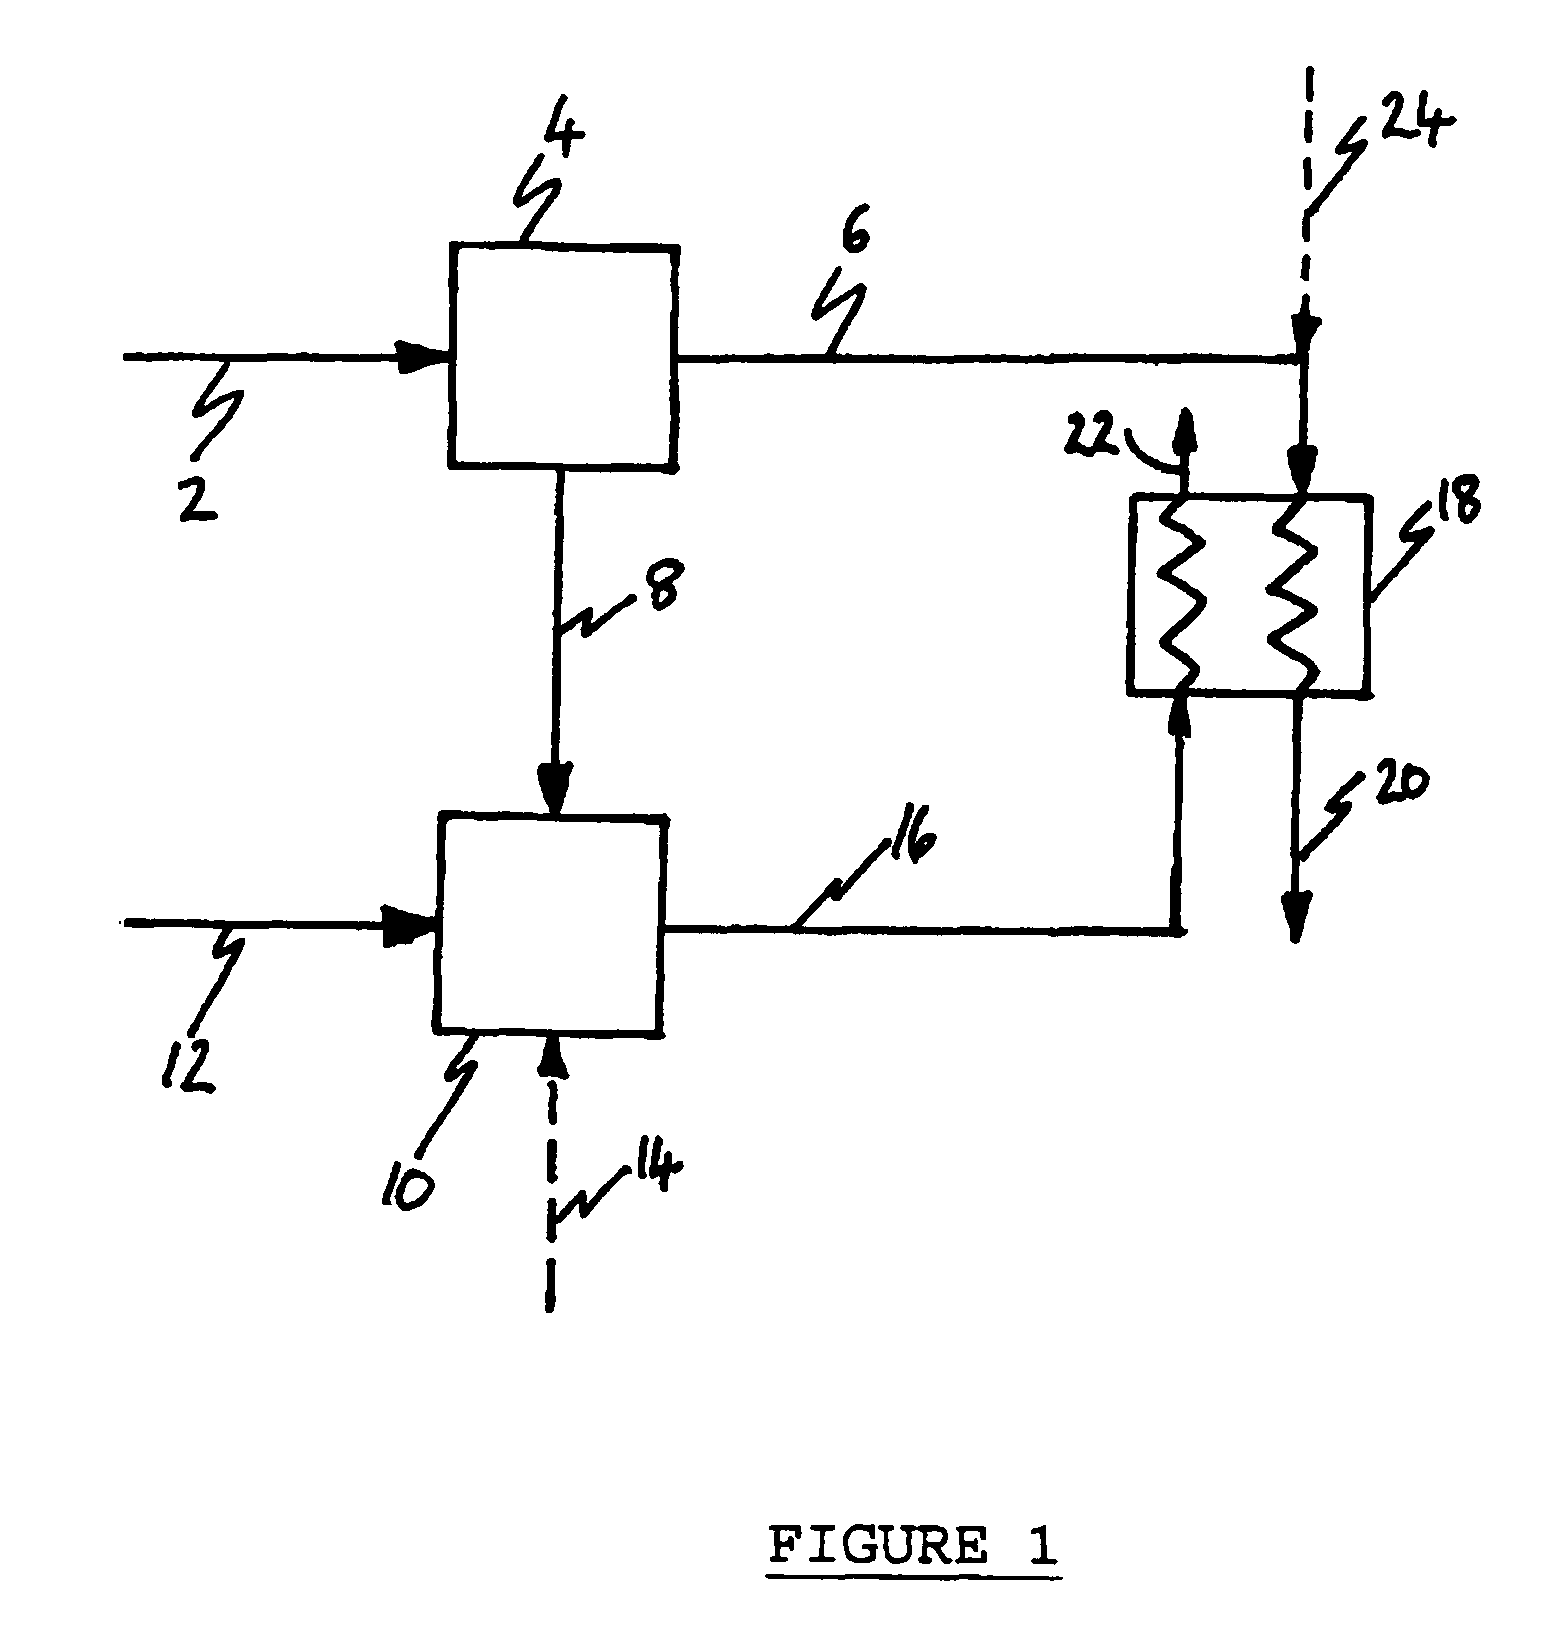 Method of treating a gaseous mixture comprising hydrogen and carbon dioxide